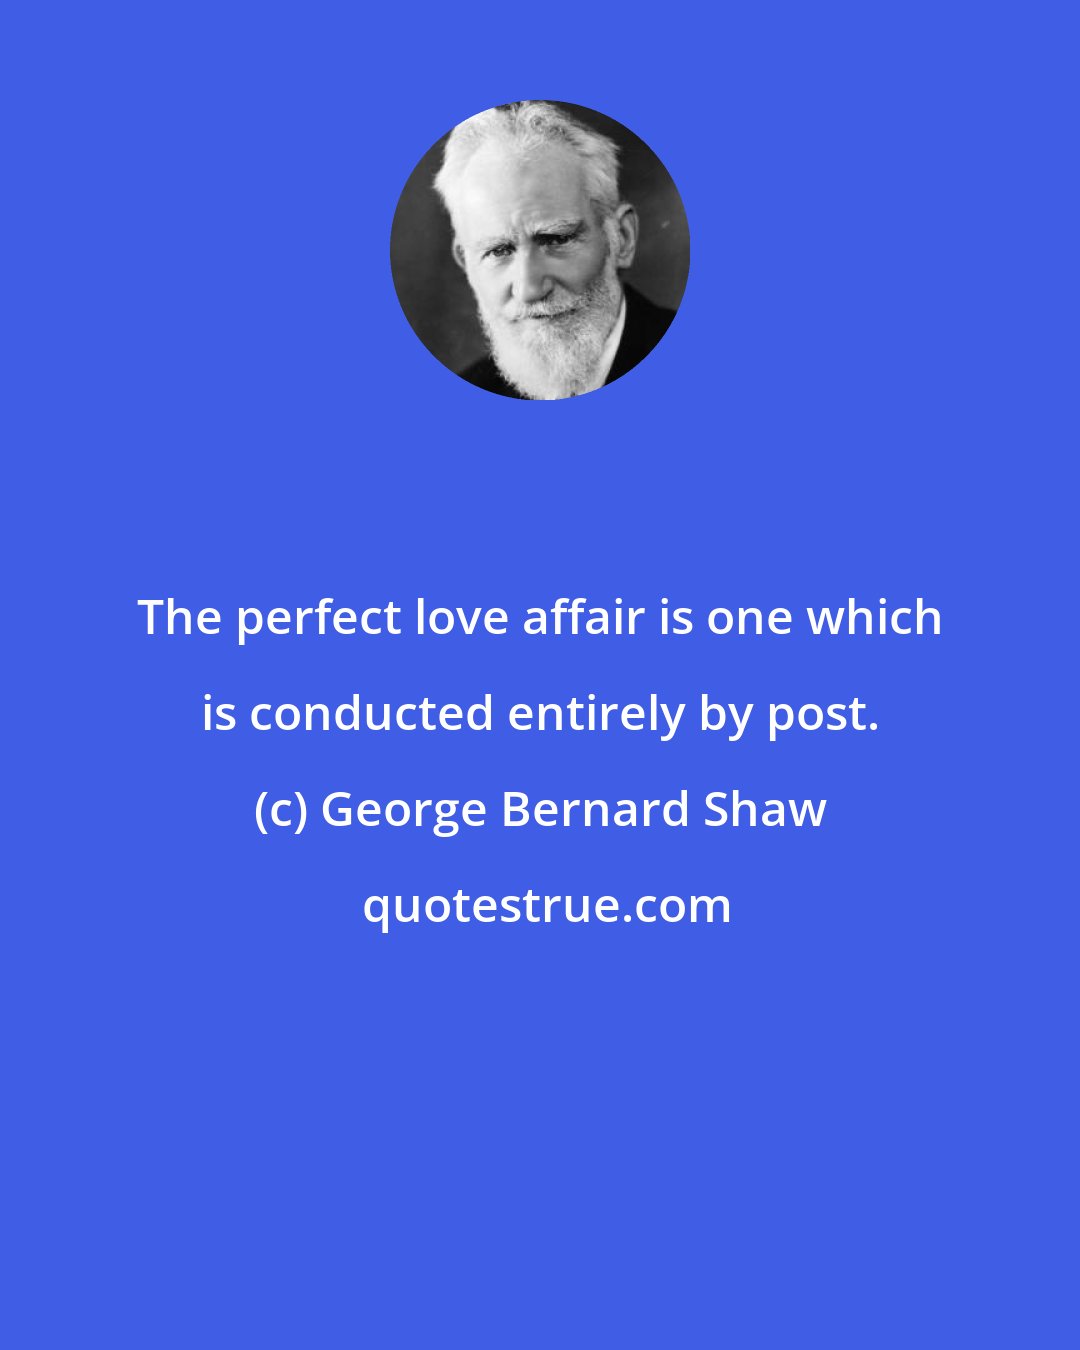 George Bernard Shaw: The perfect love affair is one which is conducted entirely by post.